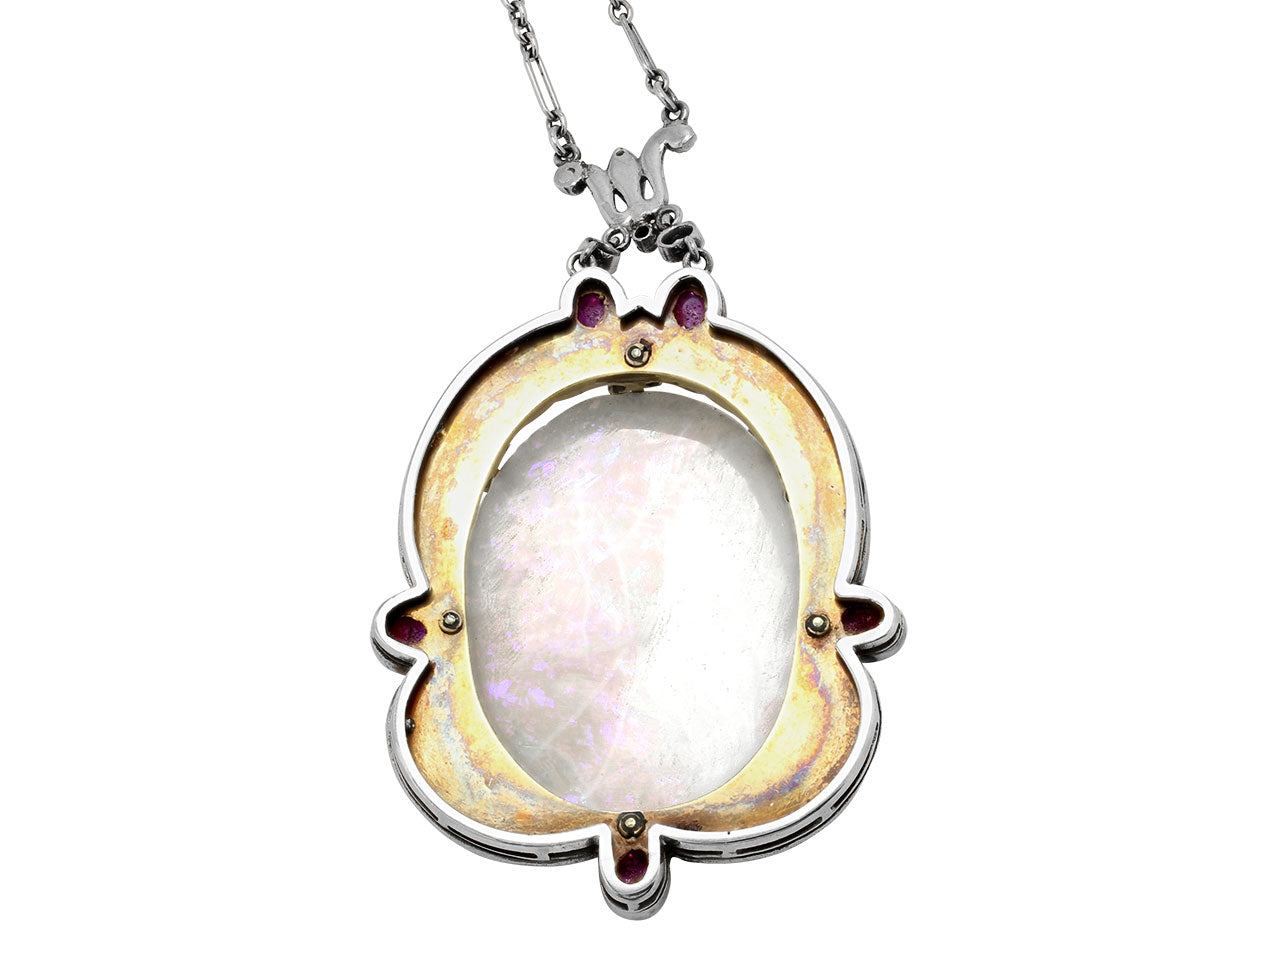 Antique Carved Opal and Enamel Cameo Necklace in Platinum and 18K Gold